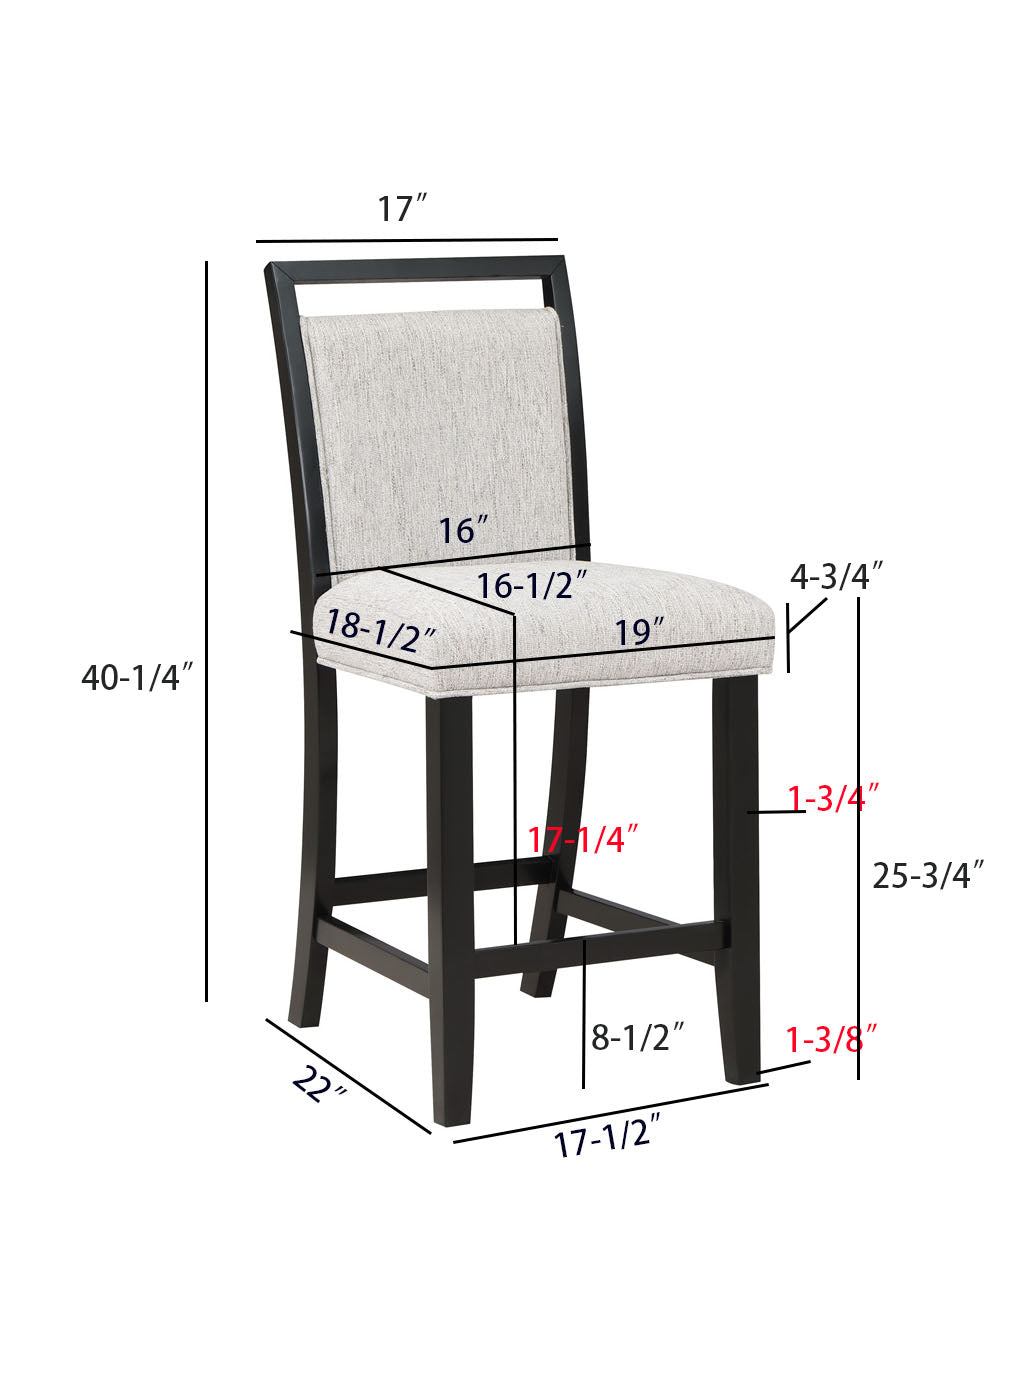 Dary Counter Height Dining Chair, Set of 2